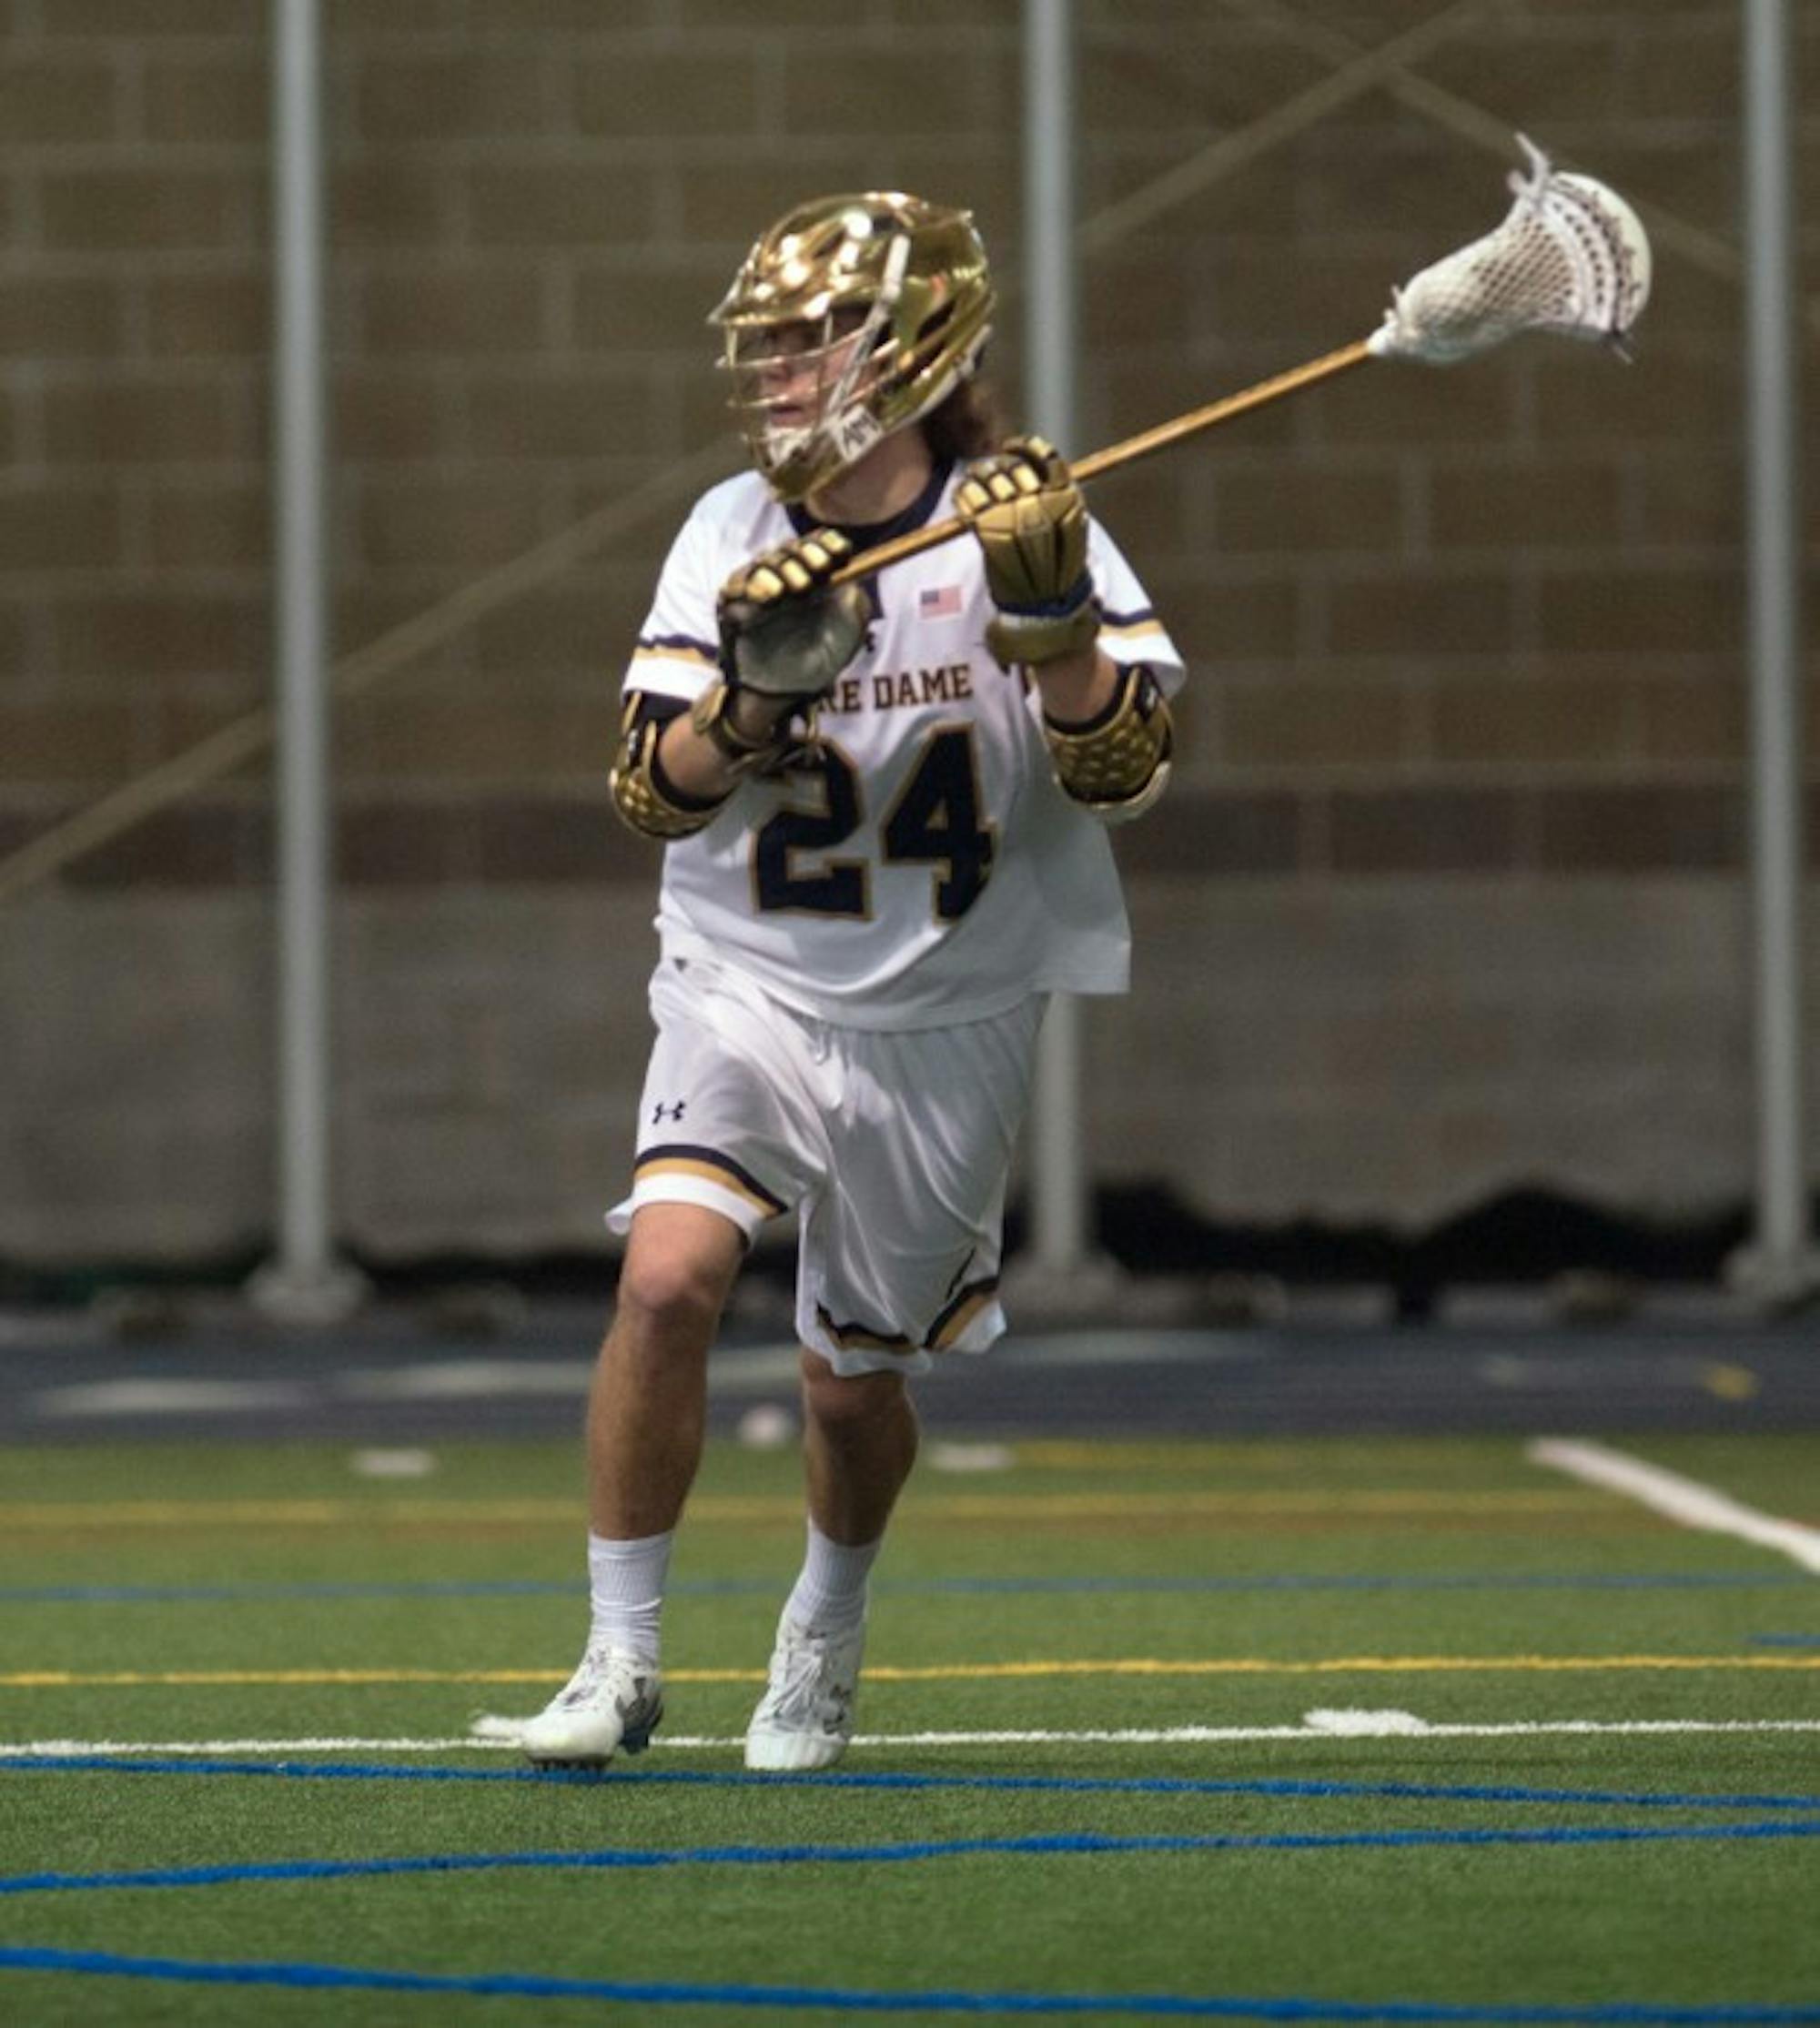 Sophomore attack Mikey Wynne looks to pass in Notre Dame’s 14-5 win over Detroit at Loftus Sports Center. Wynne scored a career-high six goals in the game.